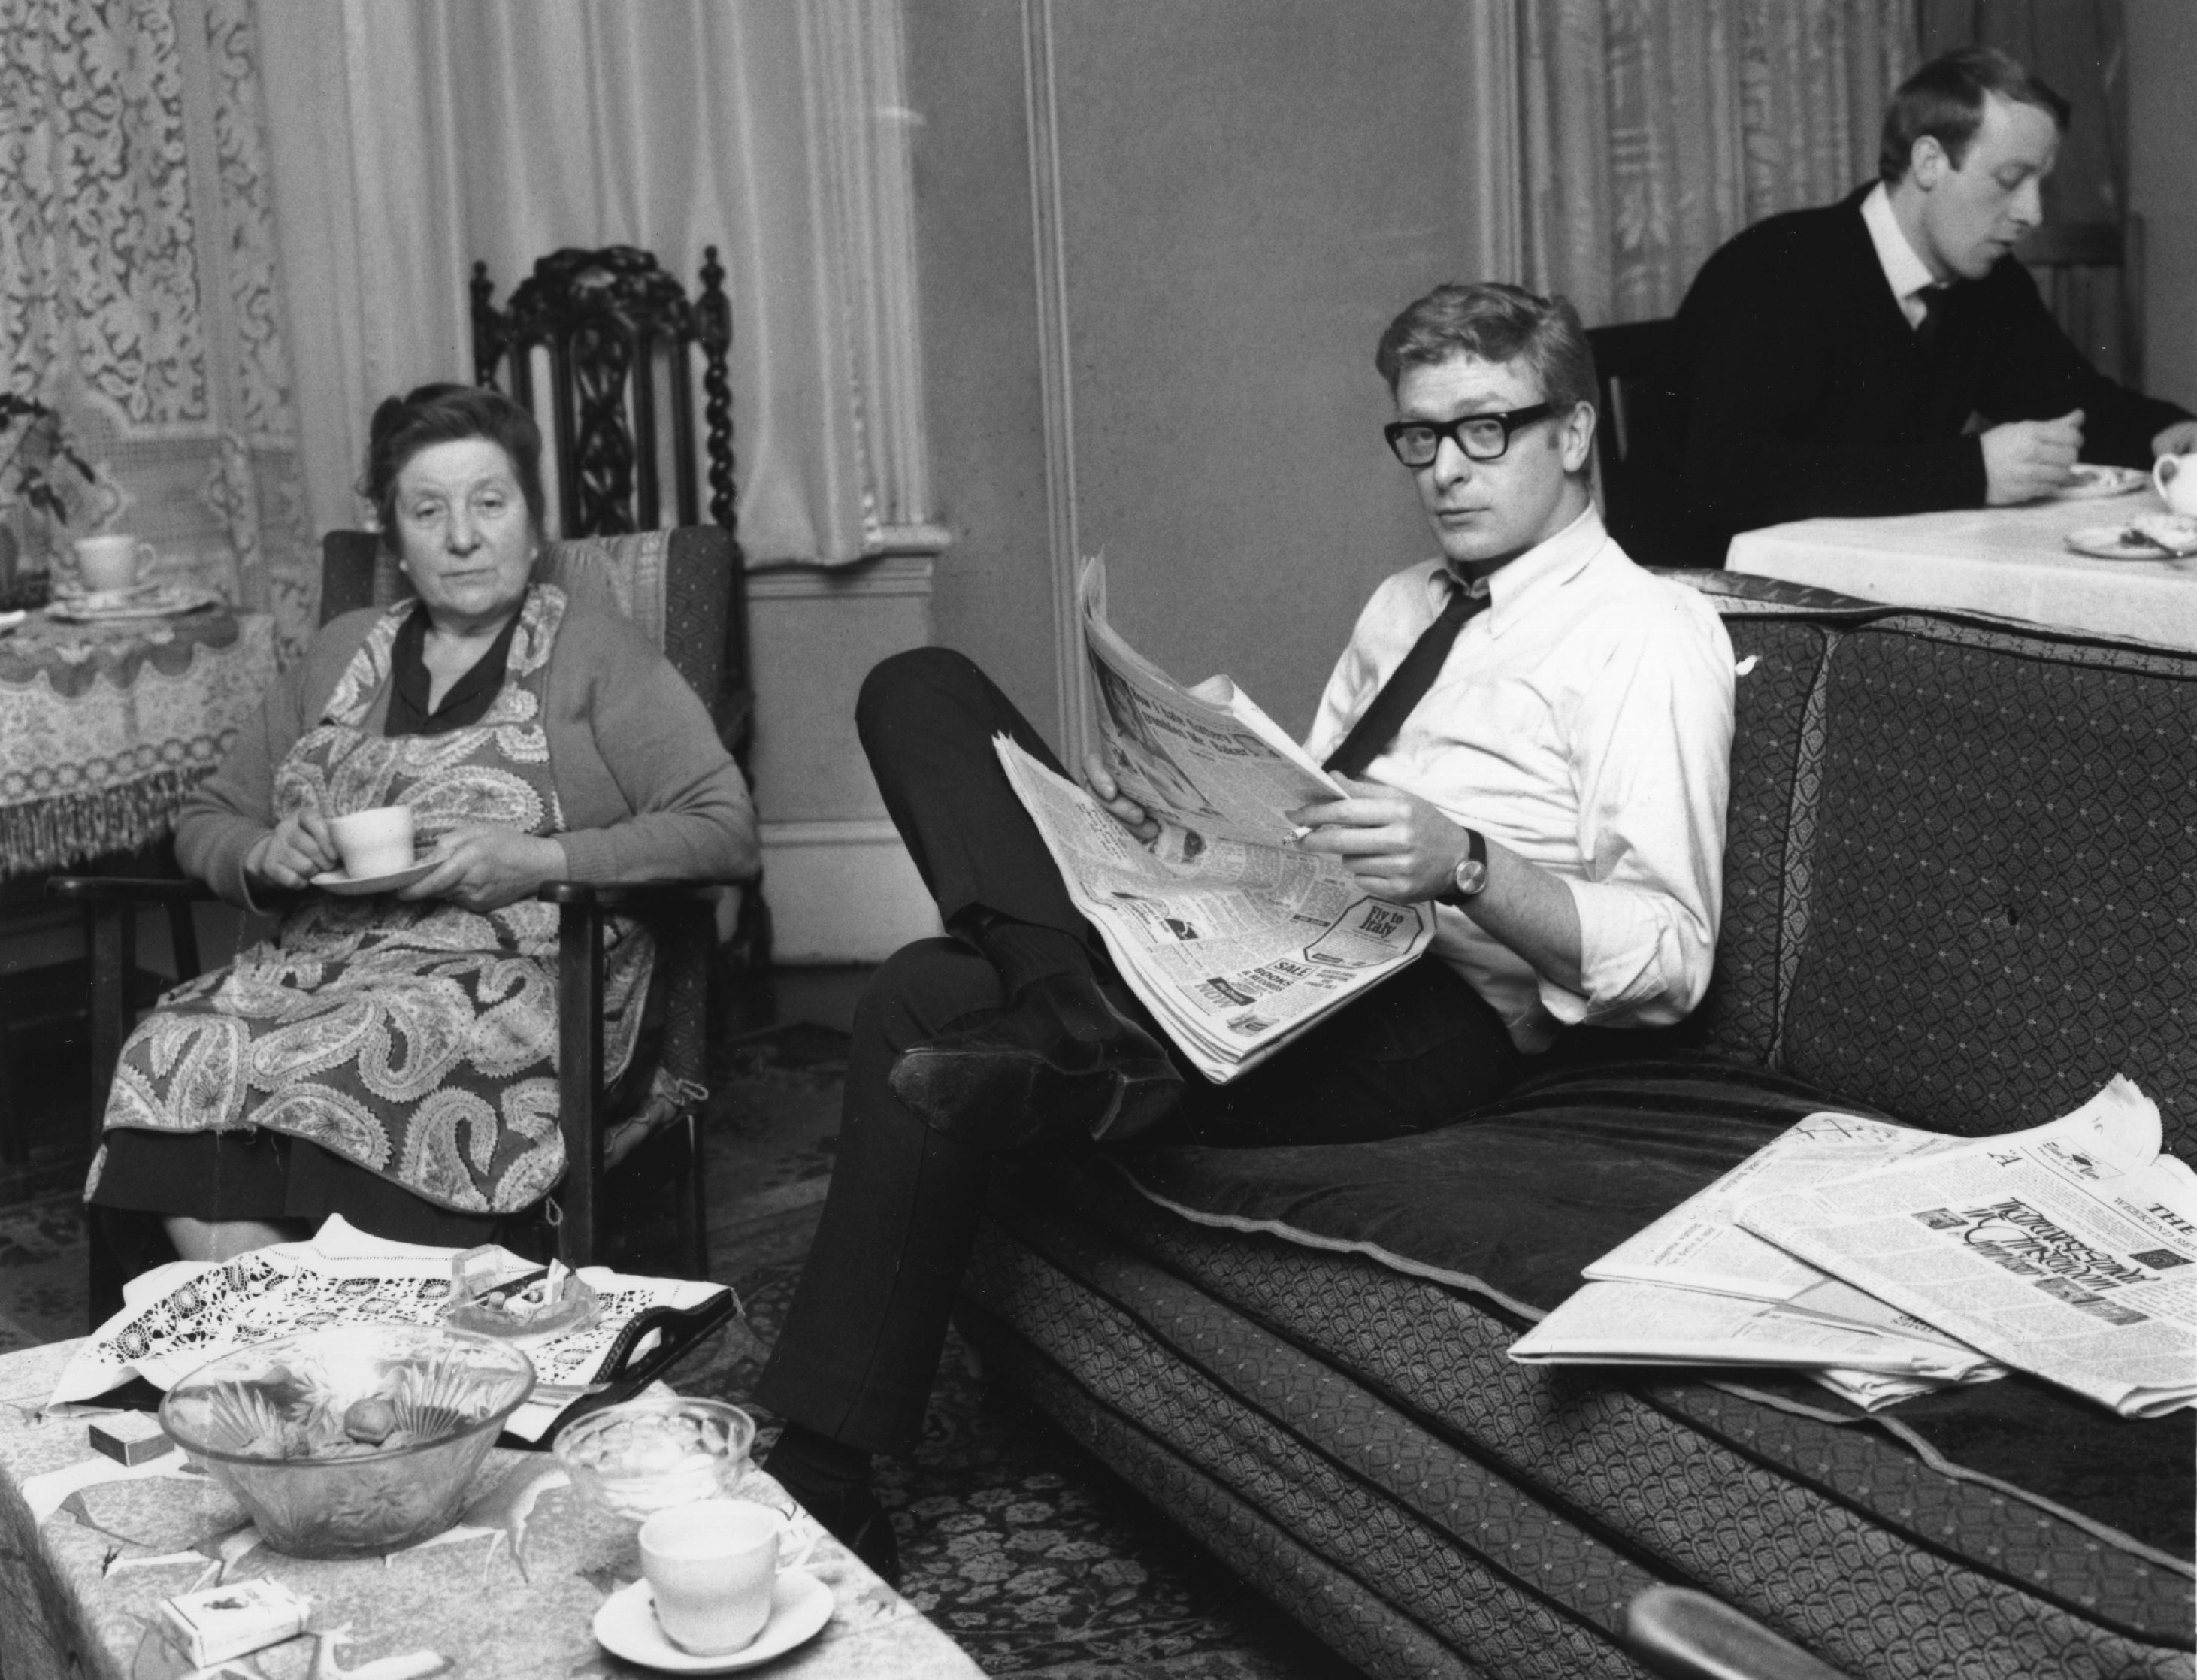 Ellen Burchell, Michael Caine and Stanley Caine at home on February 3, 1964 in England | Source: Getty Images